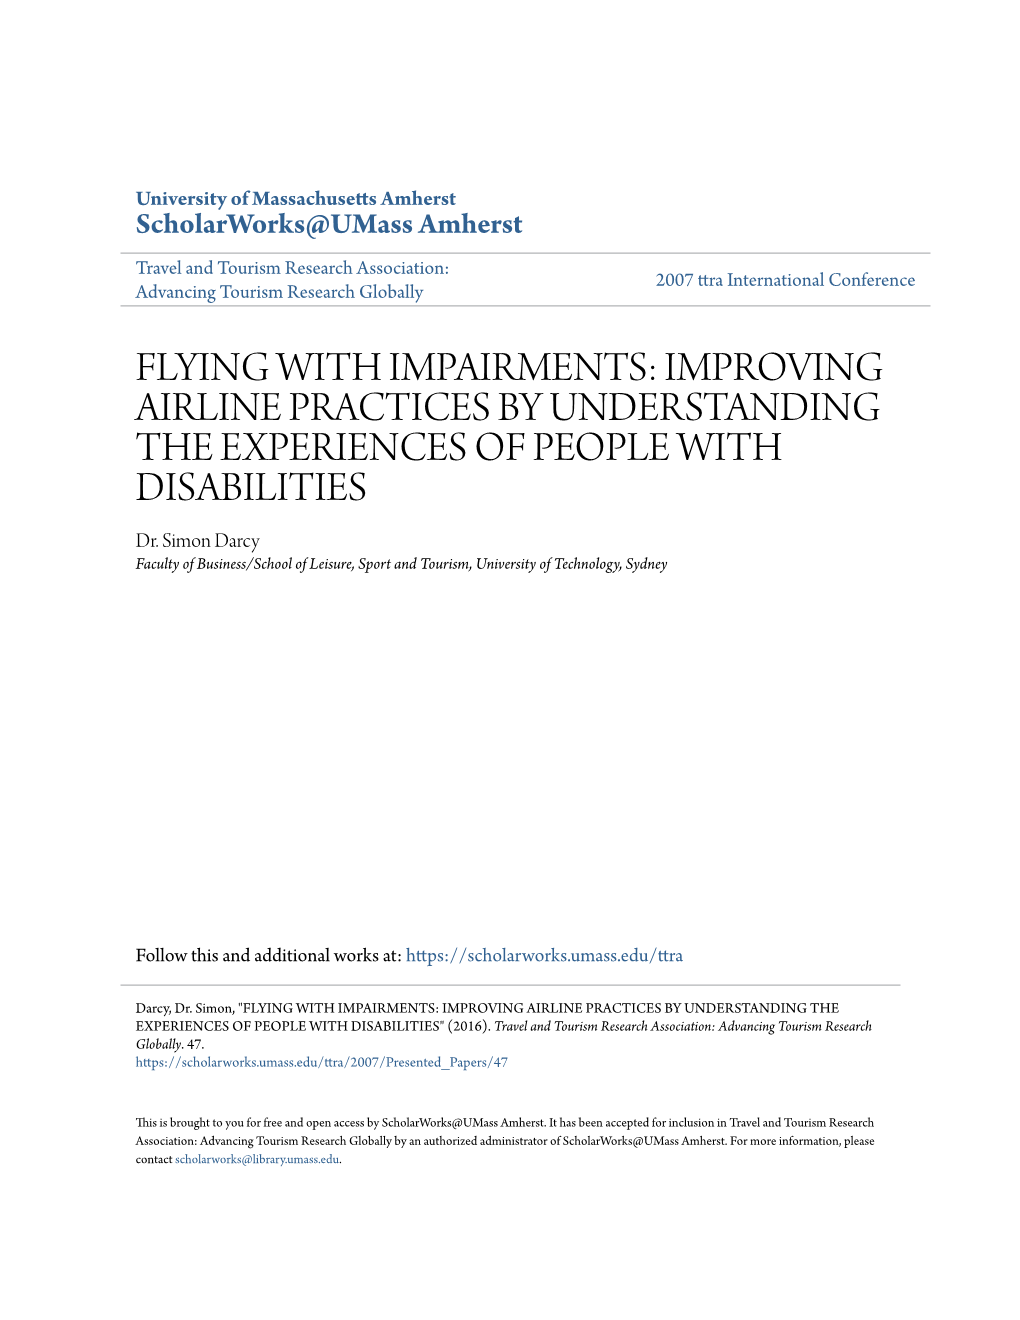 FLYING with IMPAIRMENTS: IMPROVING AIRLINE PRACTICES by UNDERSTANDING the EXPERIENCES of PEOPLE with DISABILITIES Dr